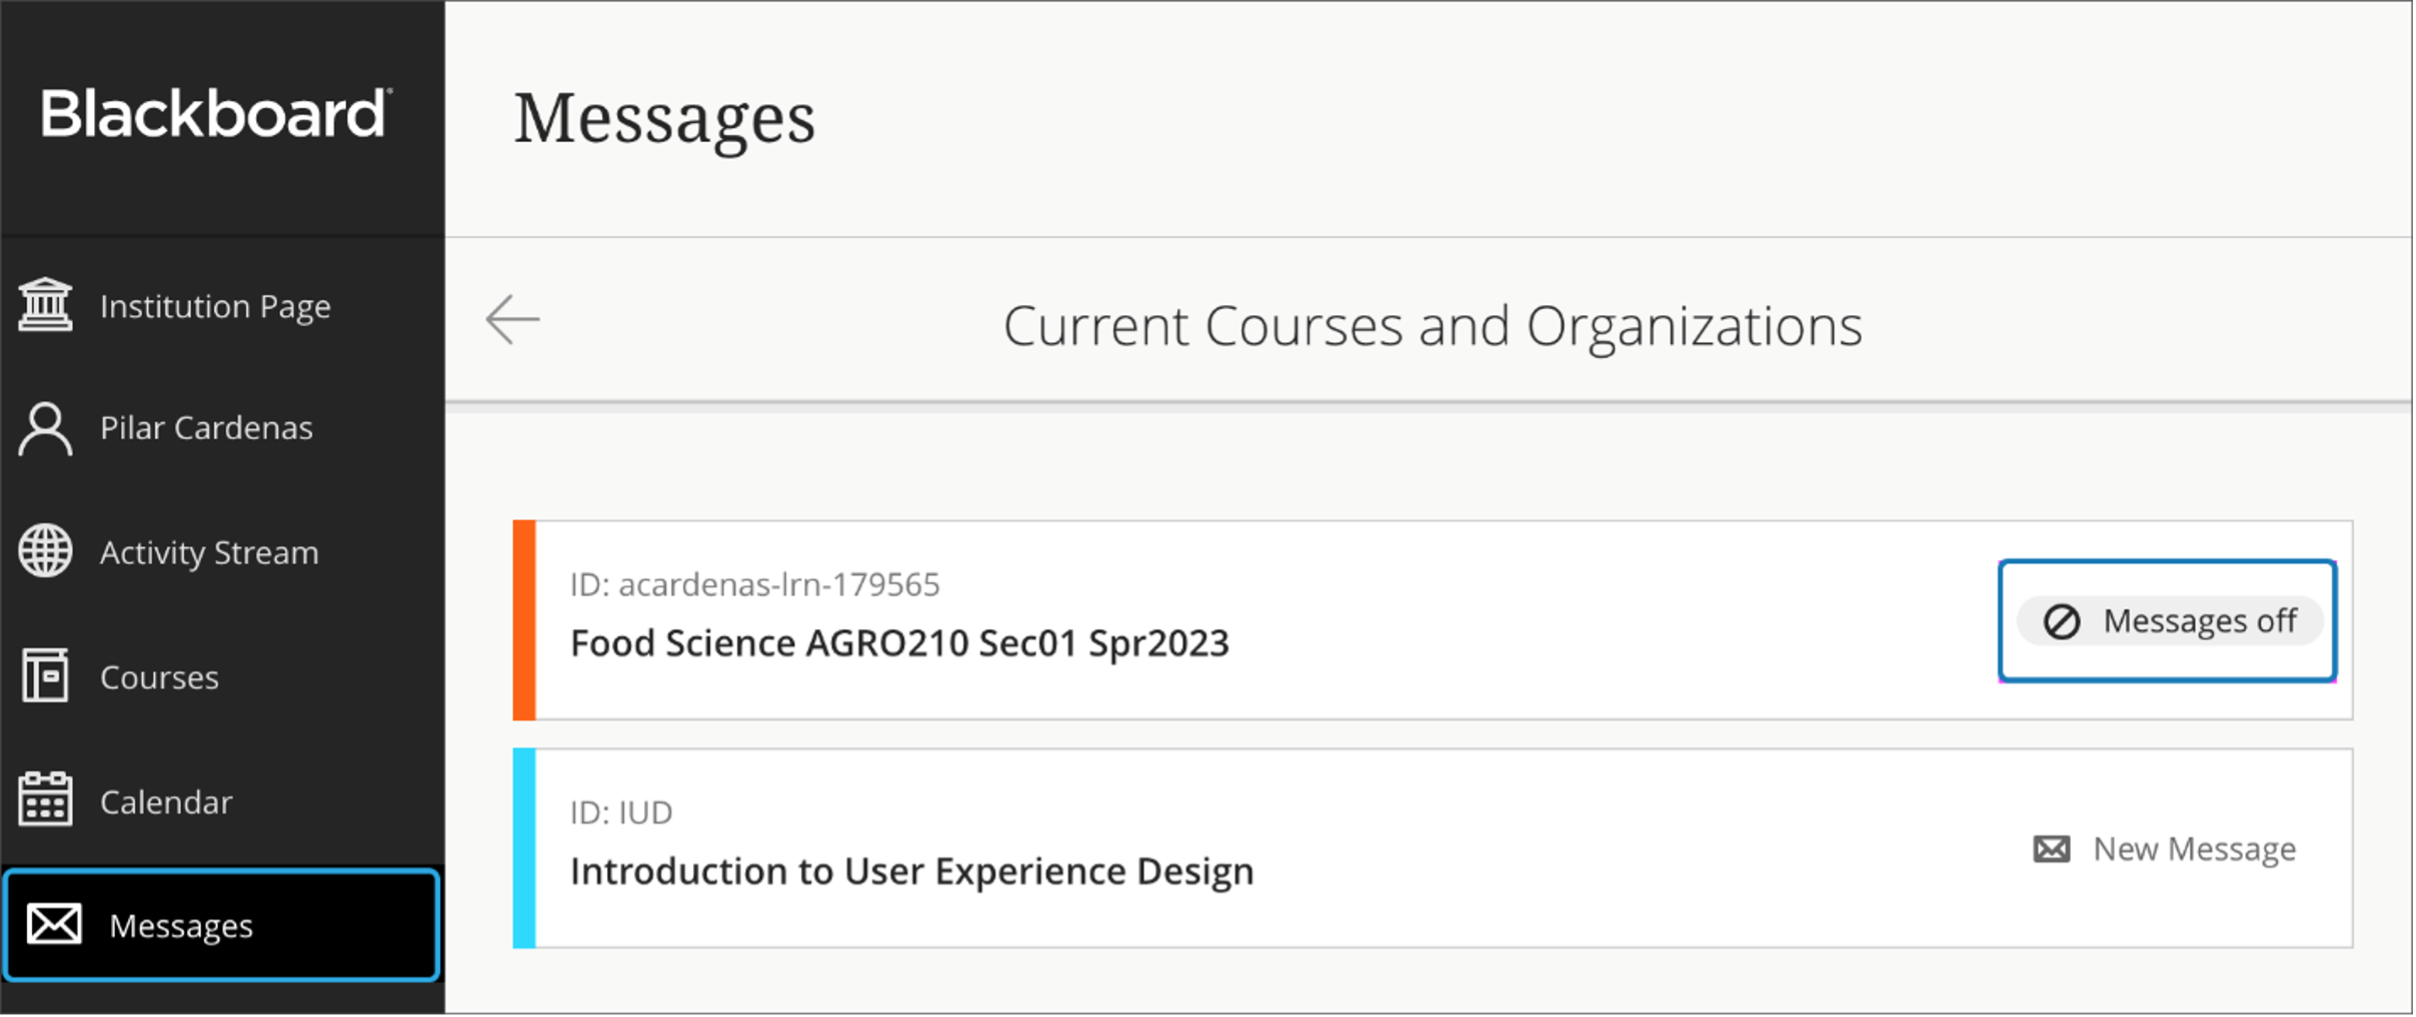 The Messages policy applied displays for each course and organization in the Base Navigation